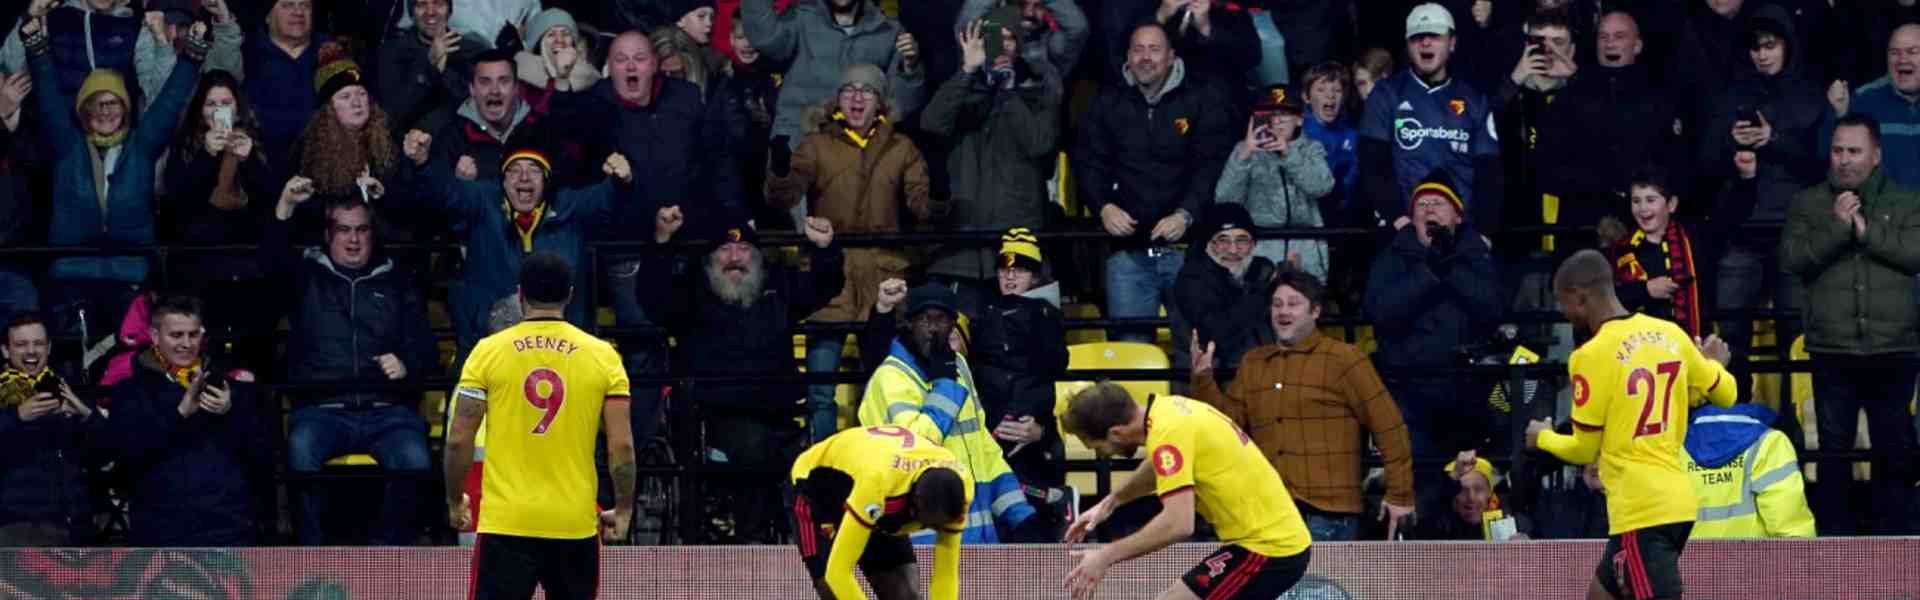 Watford pulled off a performance for the ages in the triumph against Liverpool. (Image Credit: Twitter)